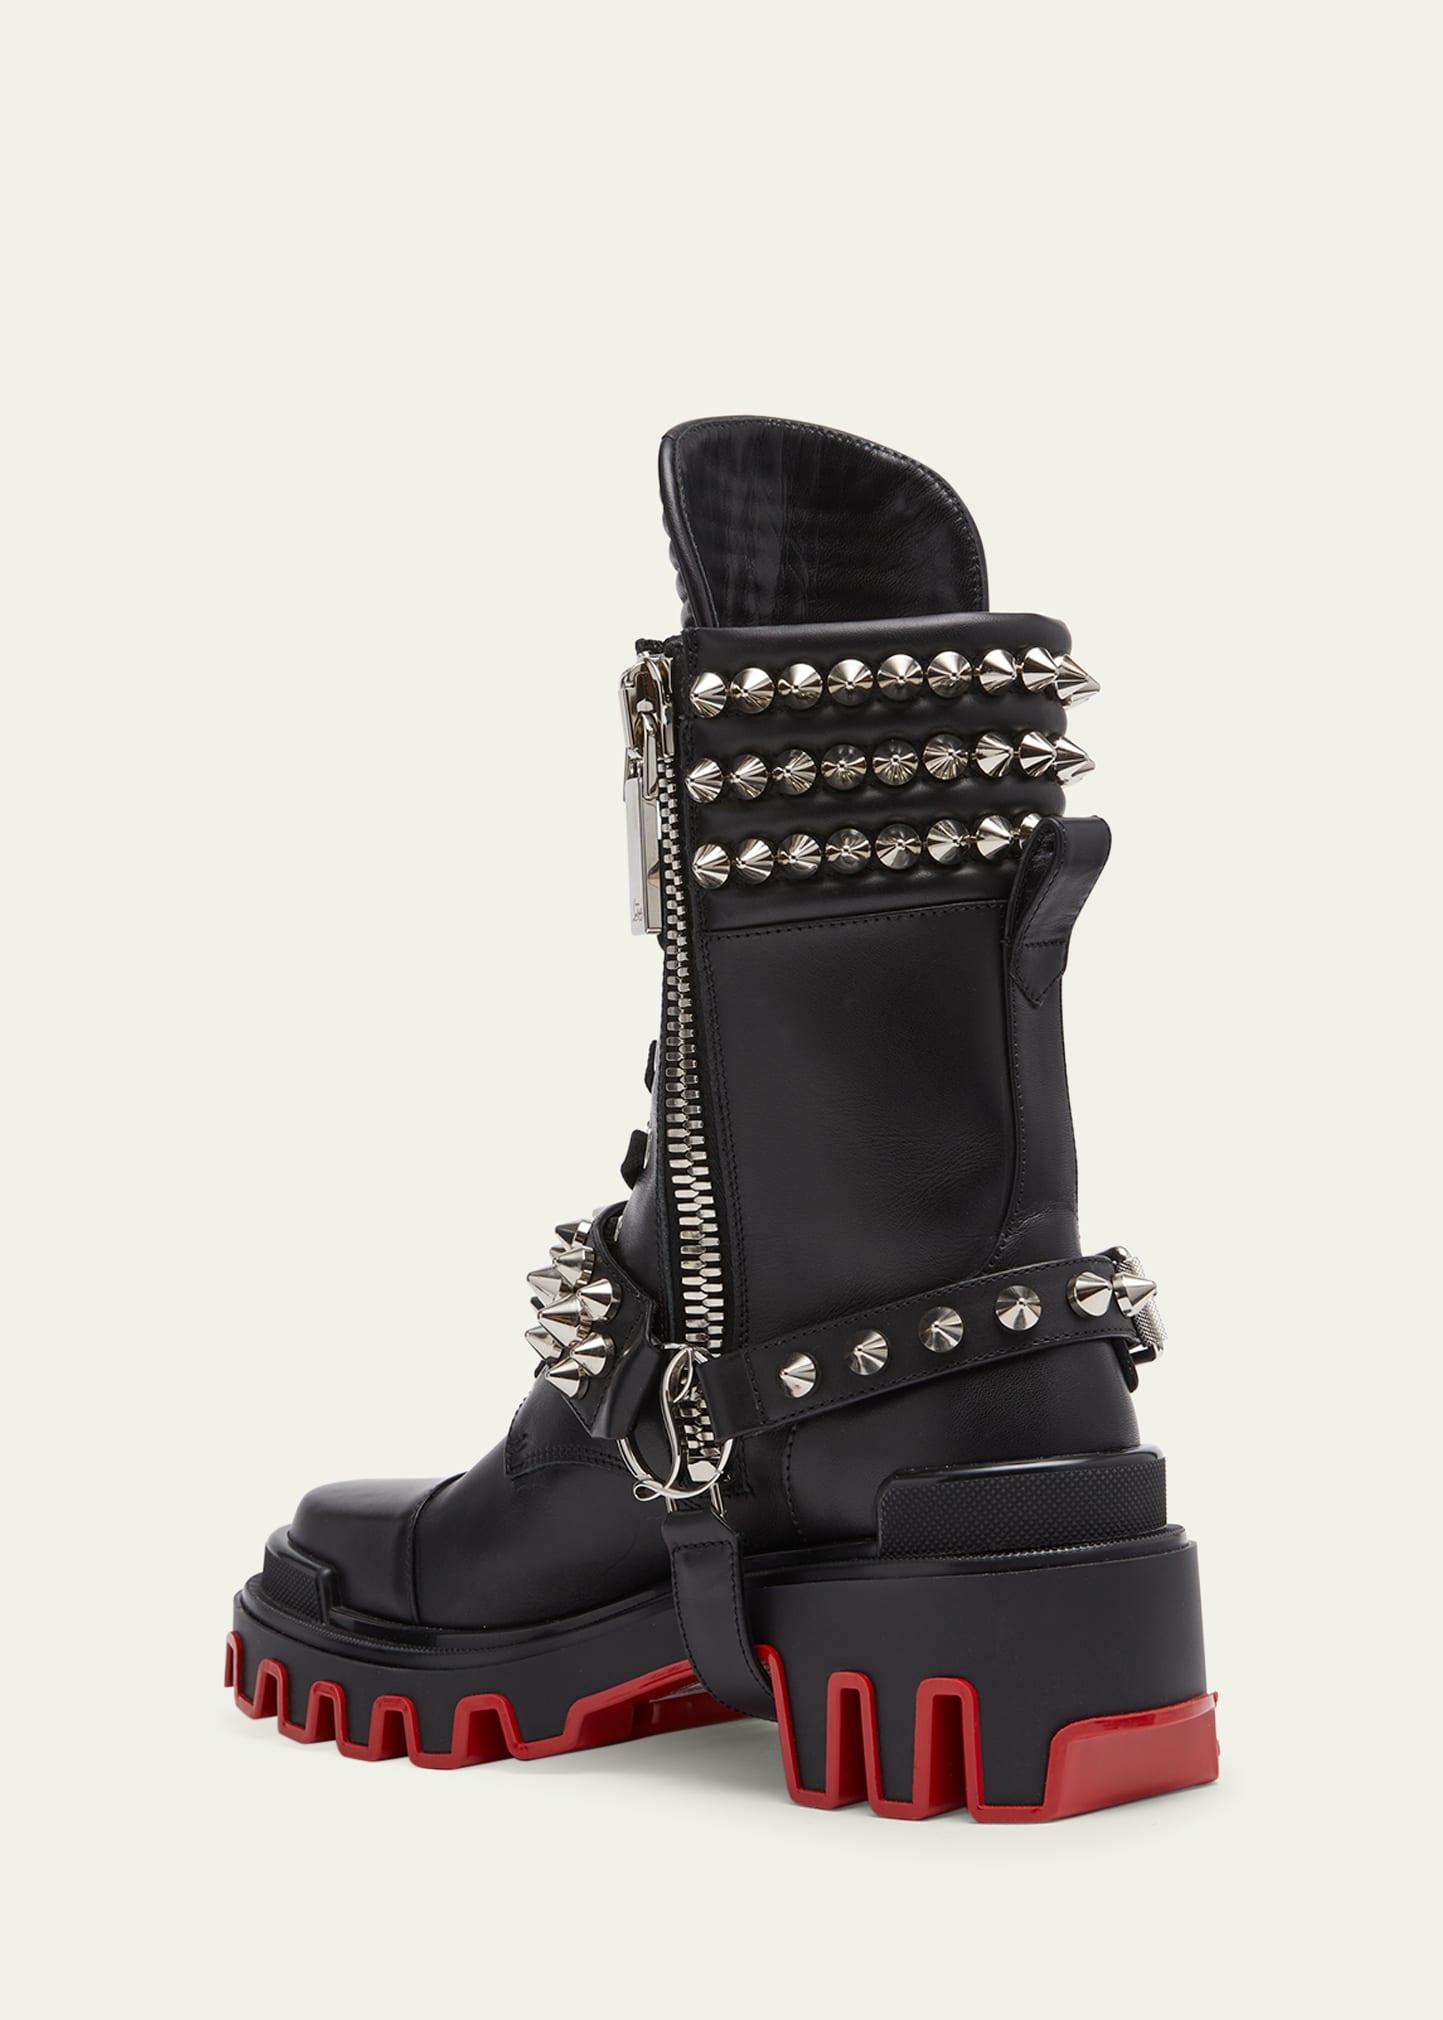 Christian Louboutin Janetta Red Sole Spike Leather Biker Boots in Black